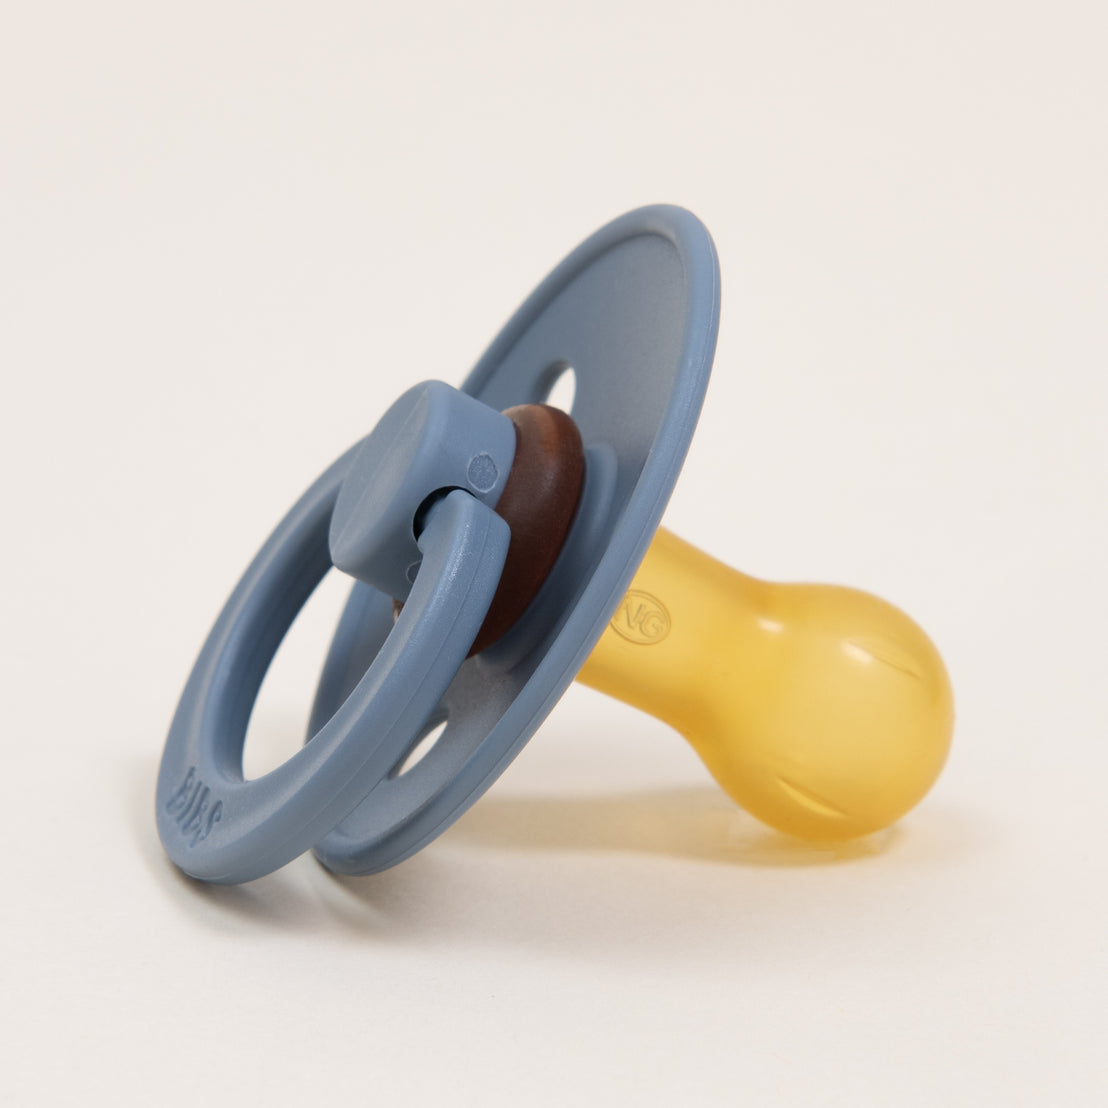 A Bibs Pacifier in Petrol with a blue shield and handle, and a yellow nipple, positioned upright on a white background.